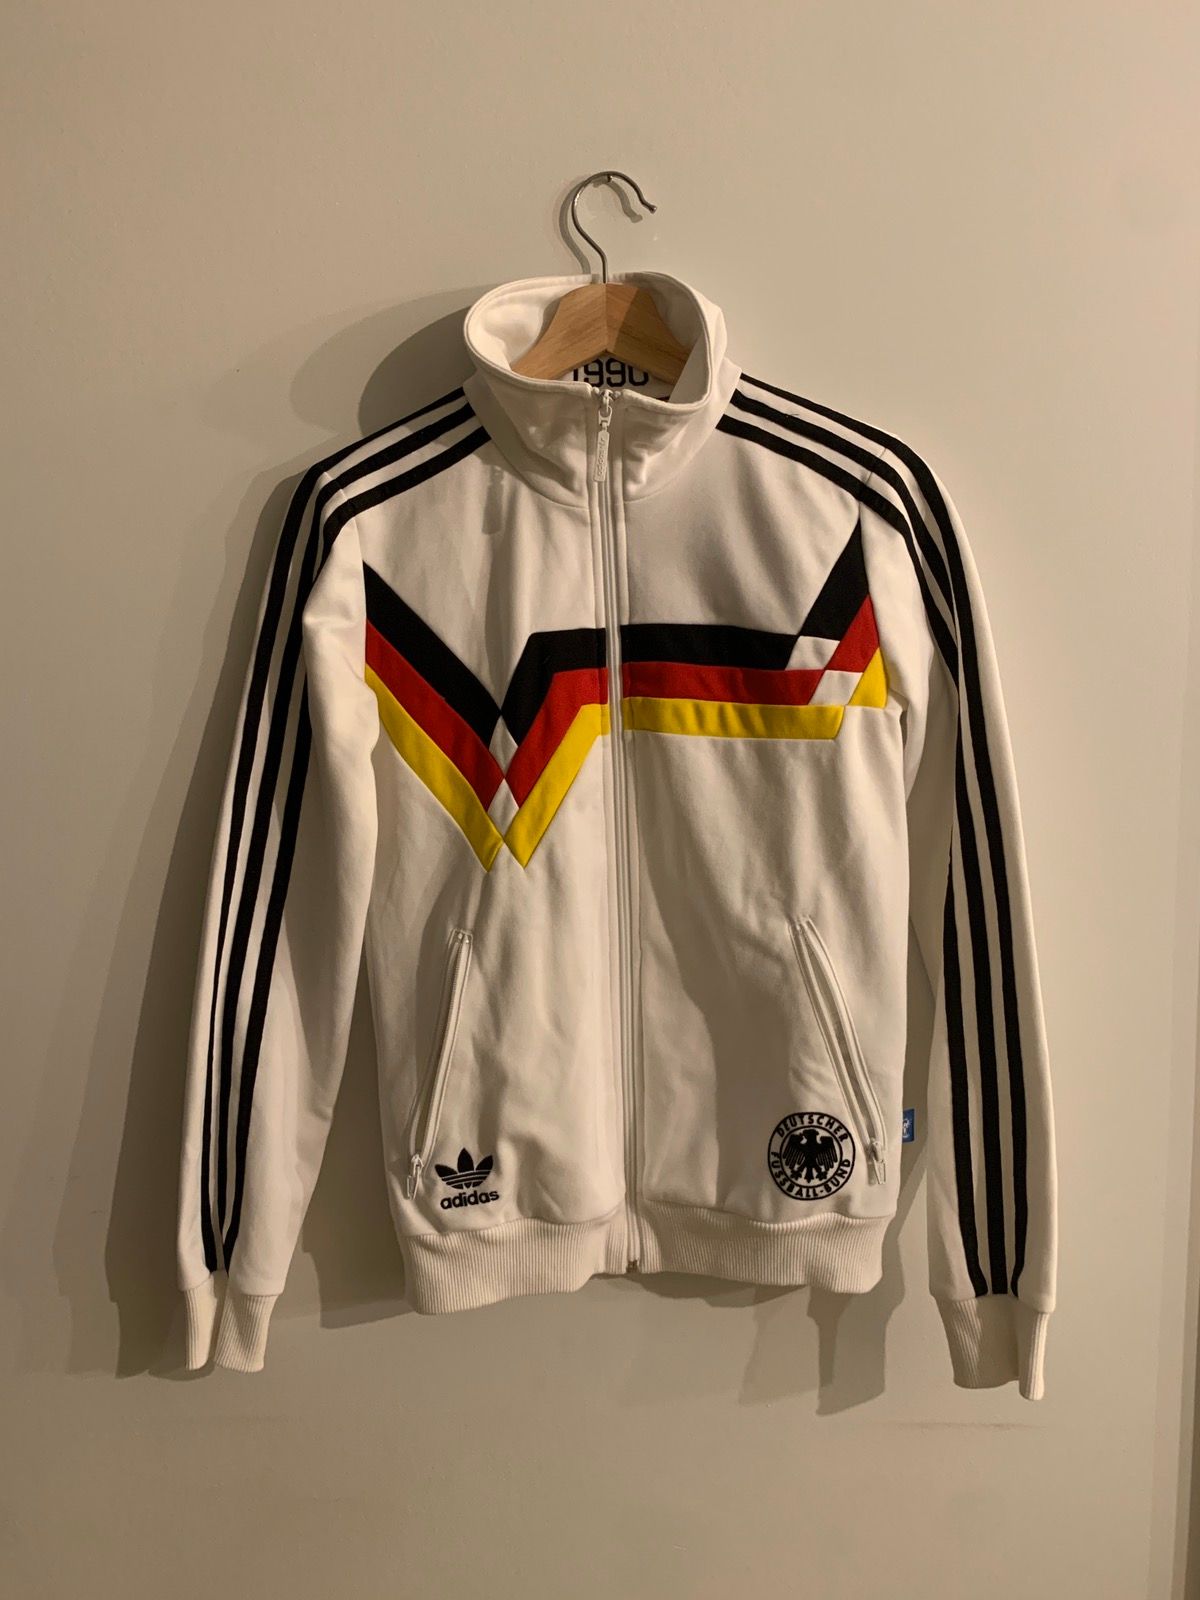 Adidas ADIDAS 1990 WEST GERMANY WORLD CUP TRACK JACKET Size US S / EU 44-46 / 1 - 1 Preview